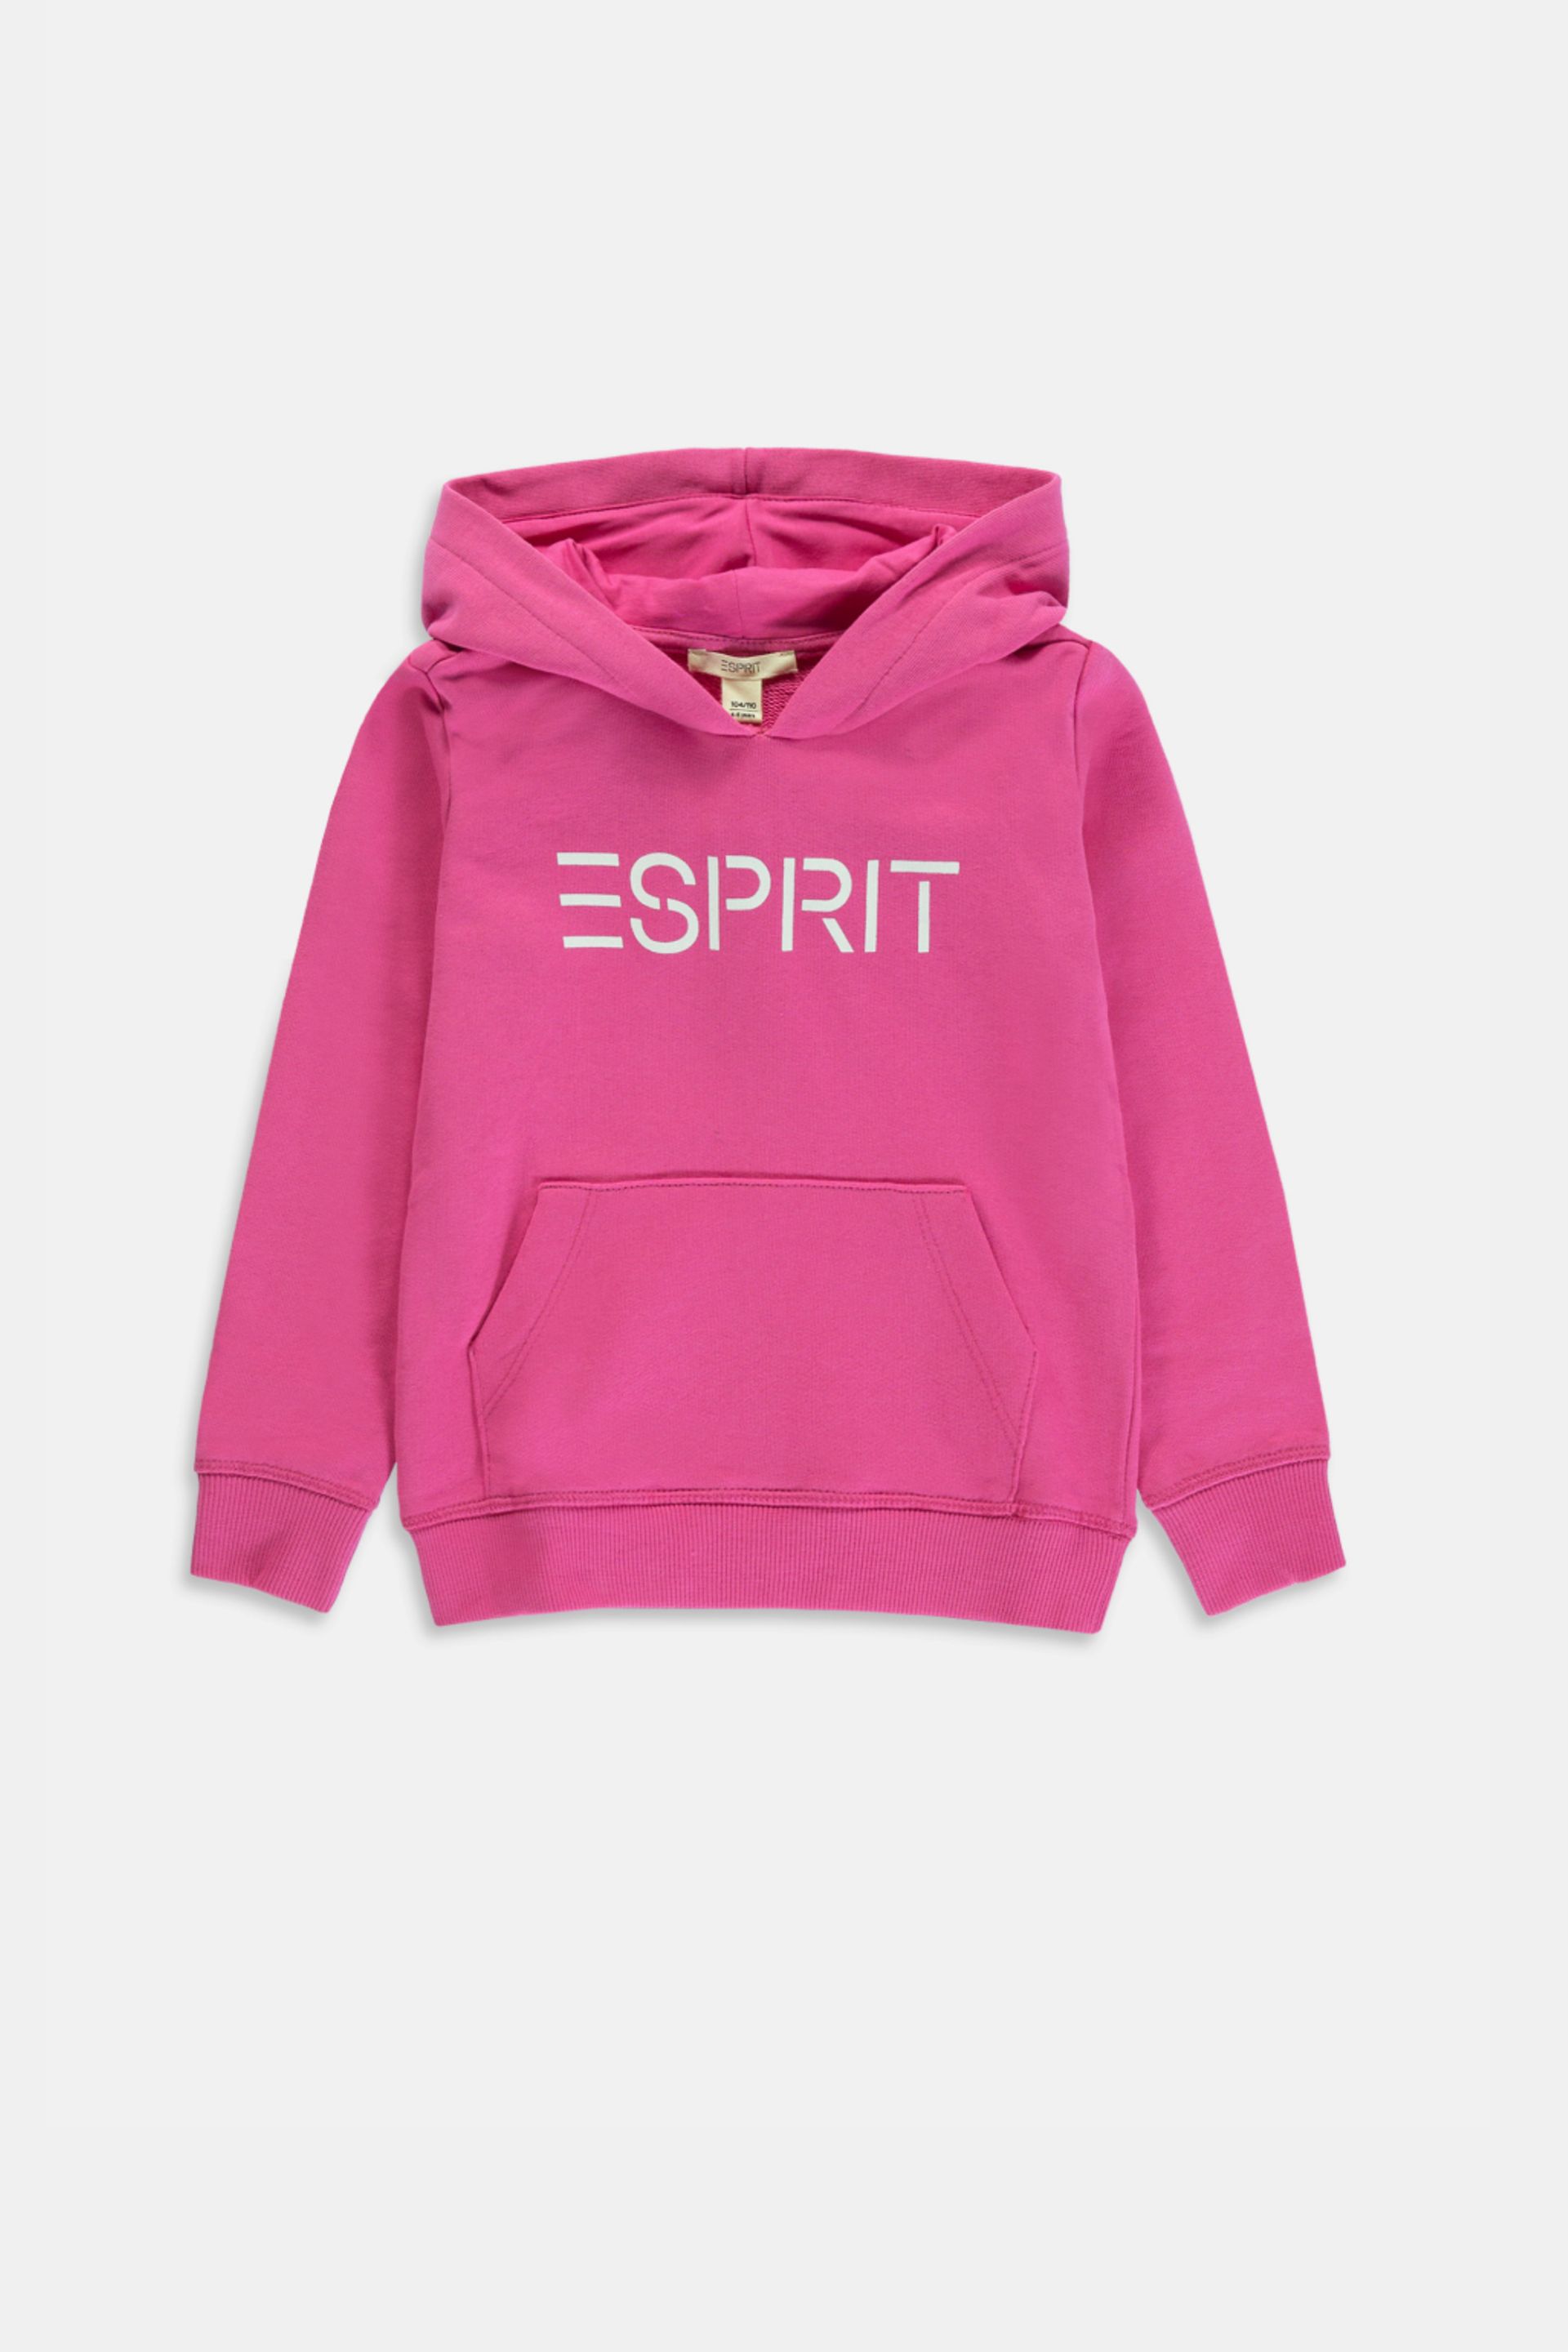 Shop kids’ clothing for girls and boys by ESPRIT online